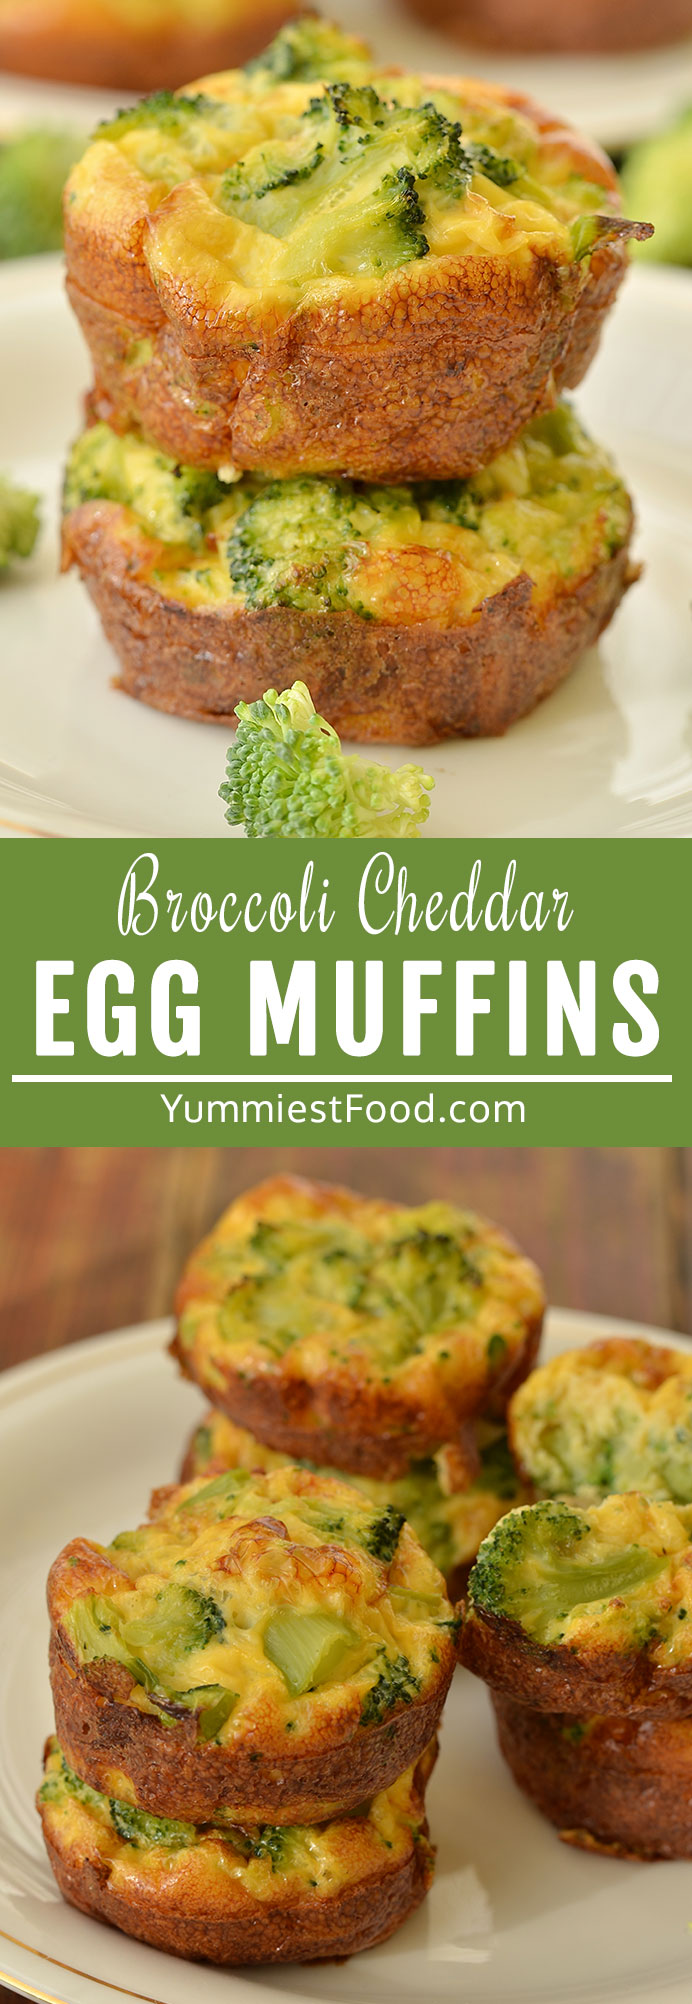 Broccoli Cheddar Egg Muffins are loaded with cheddar cheese and fresh broccoli. They are a quick and easy way to get your eggs in the morning. Perfect on-to-go breakfast muffins! #breakfast #muffins #muffinrecipes